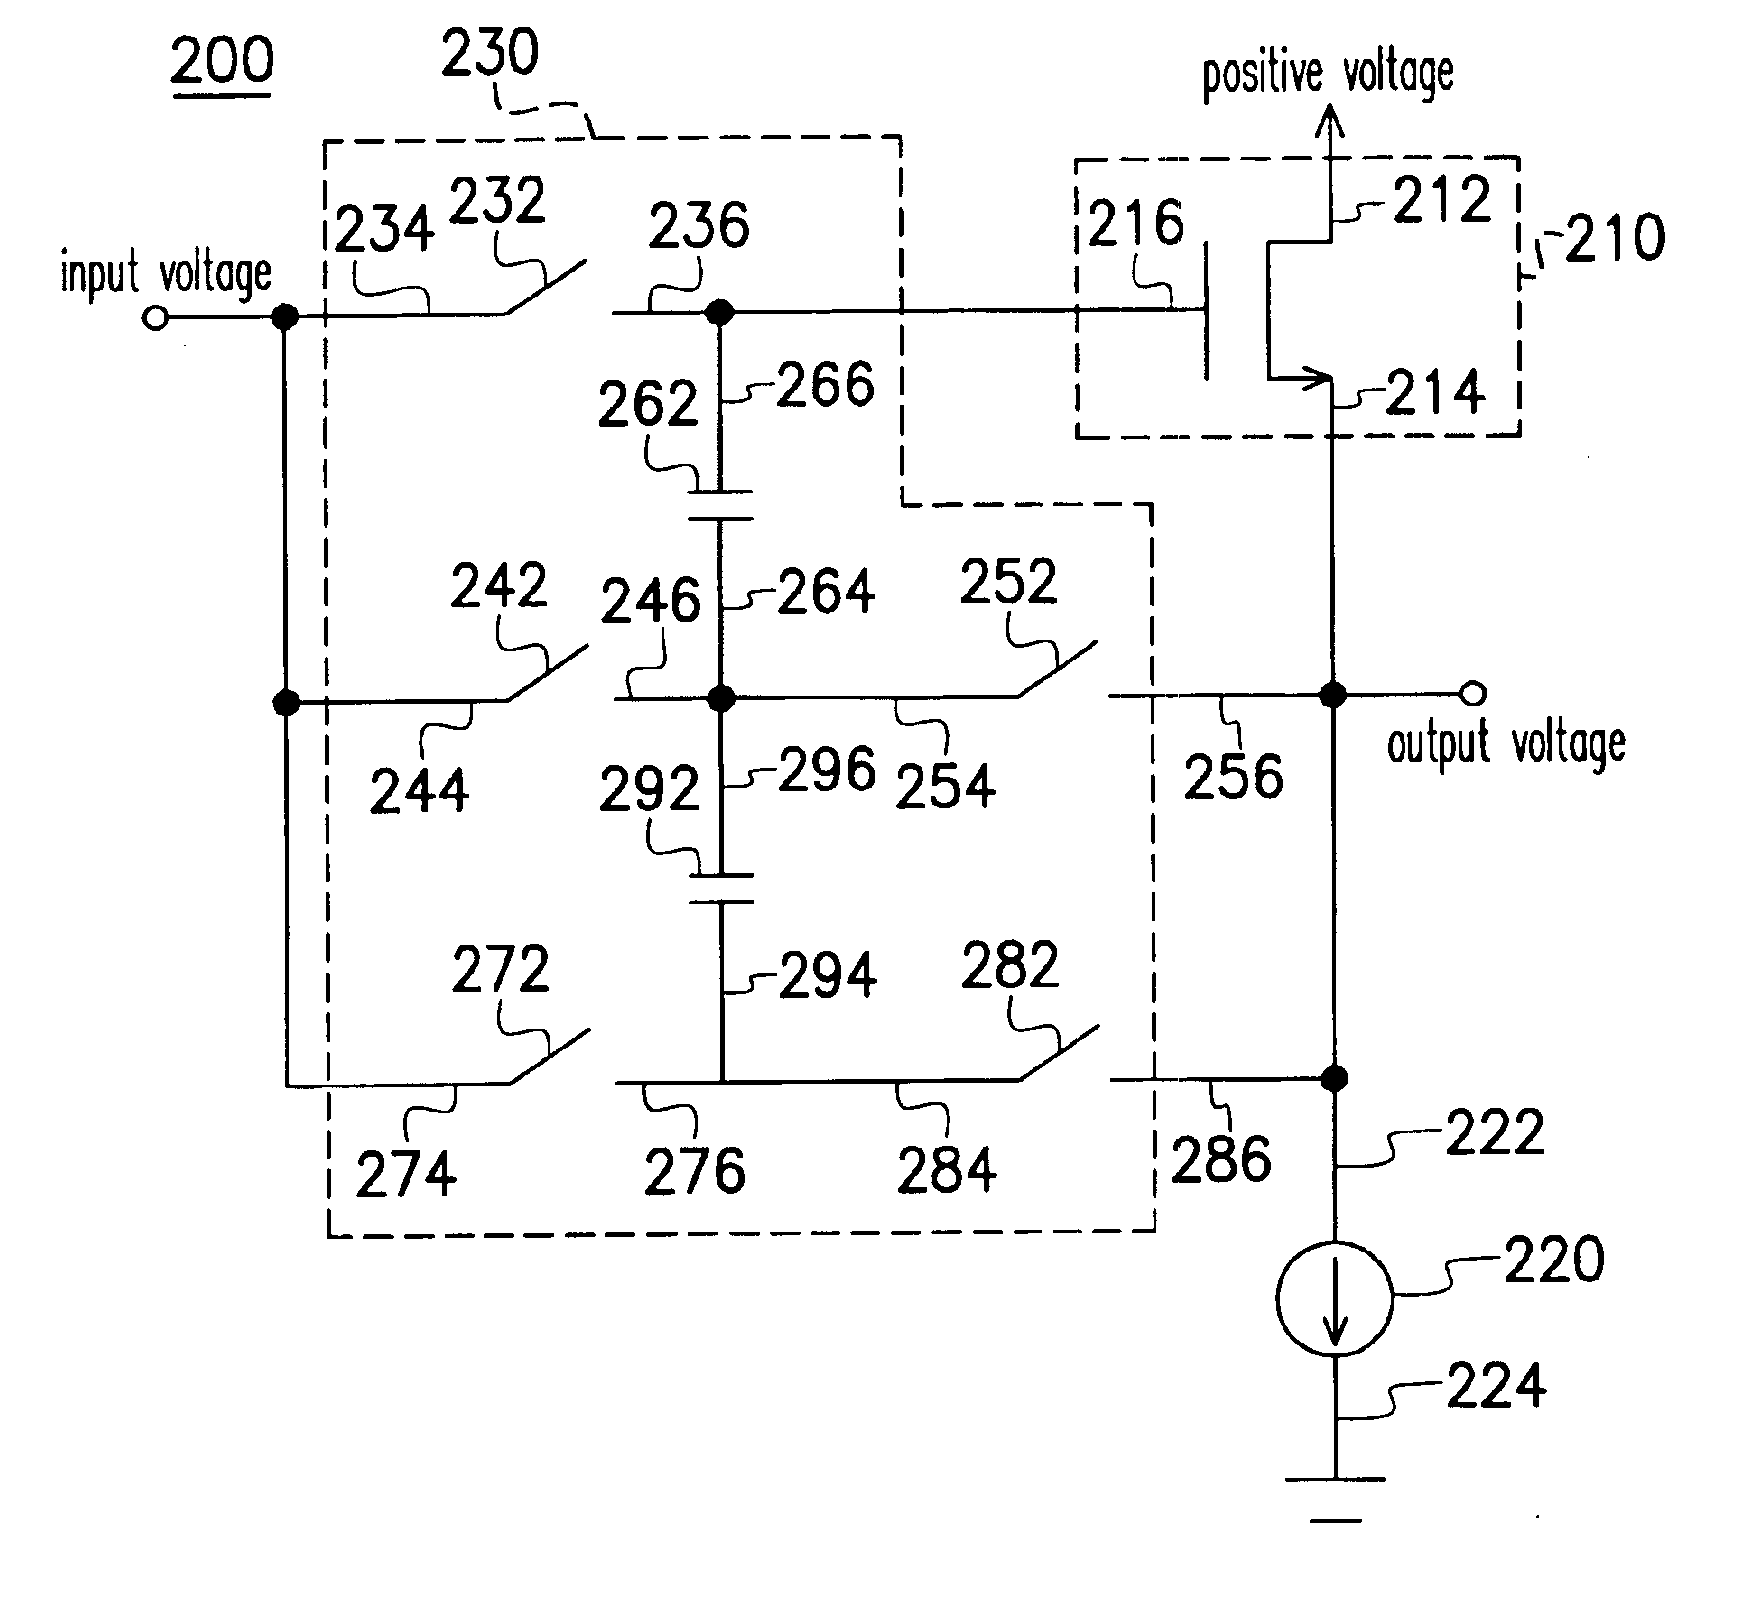 Source follower capable of compensating the threshold voltage